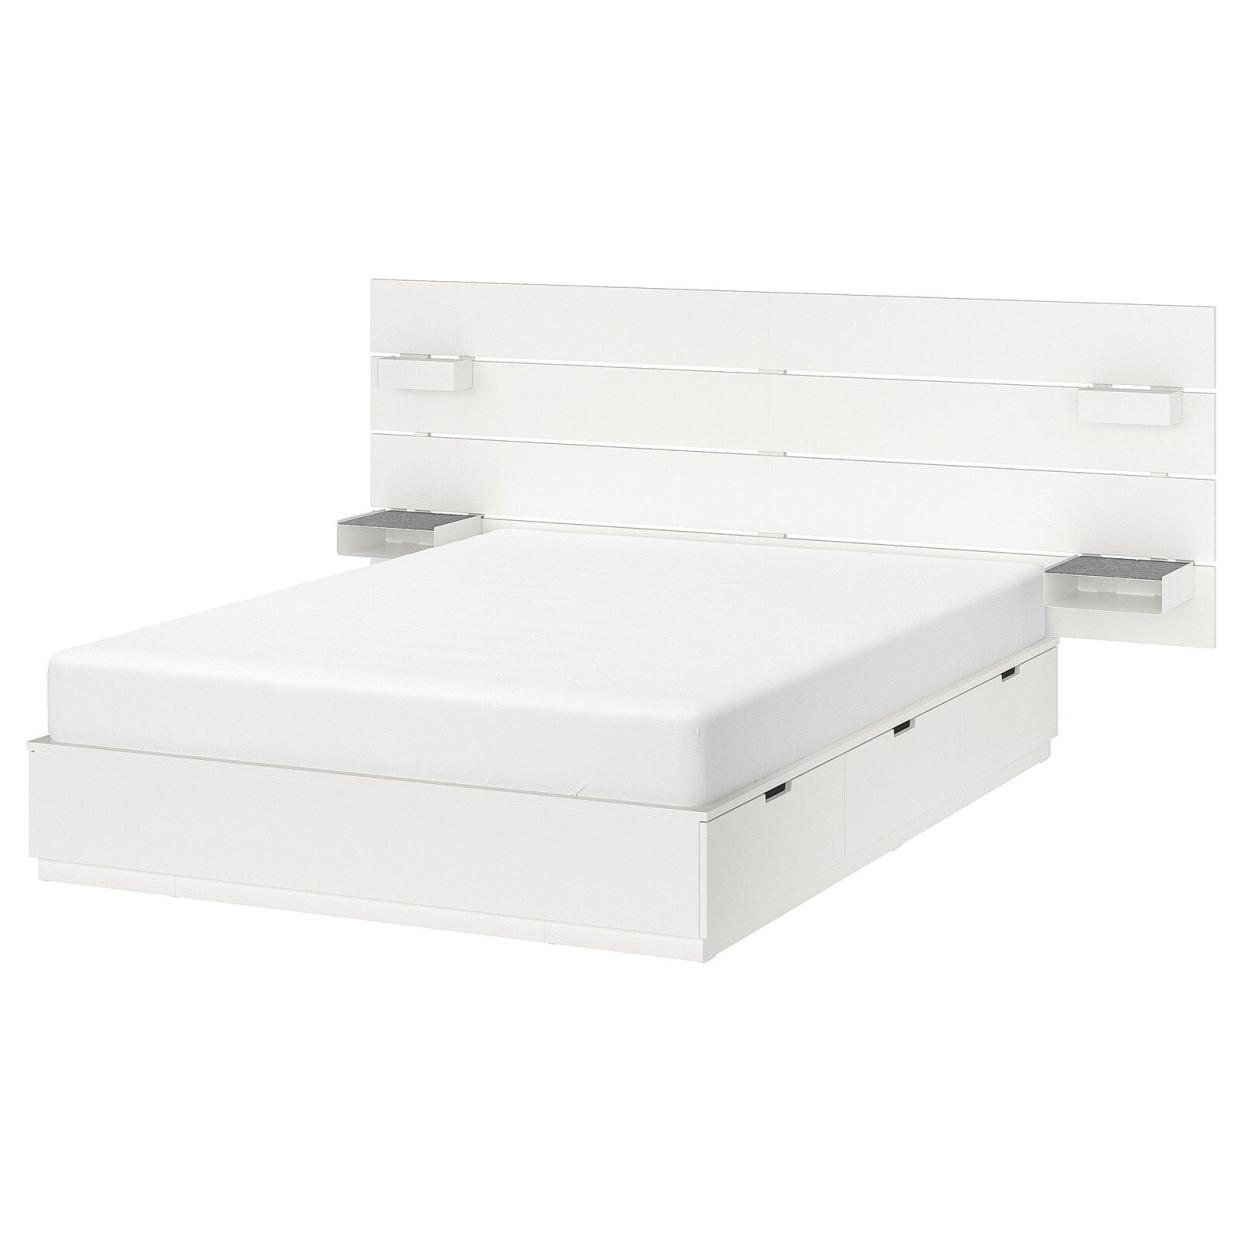 Nordli Bed With Headboard and Storage: